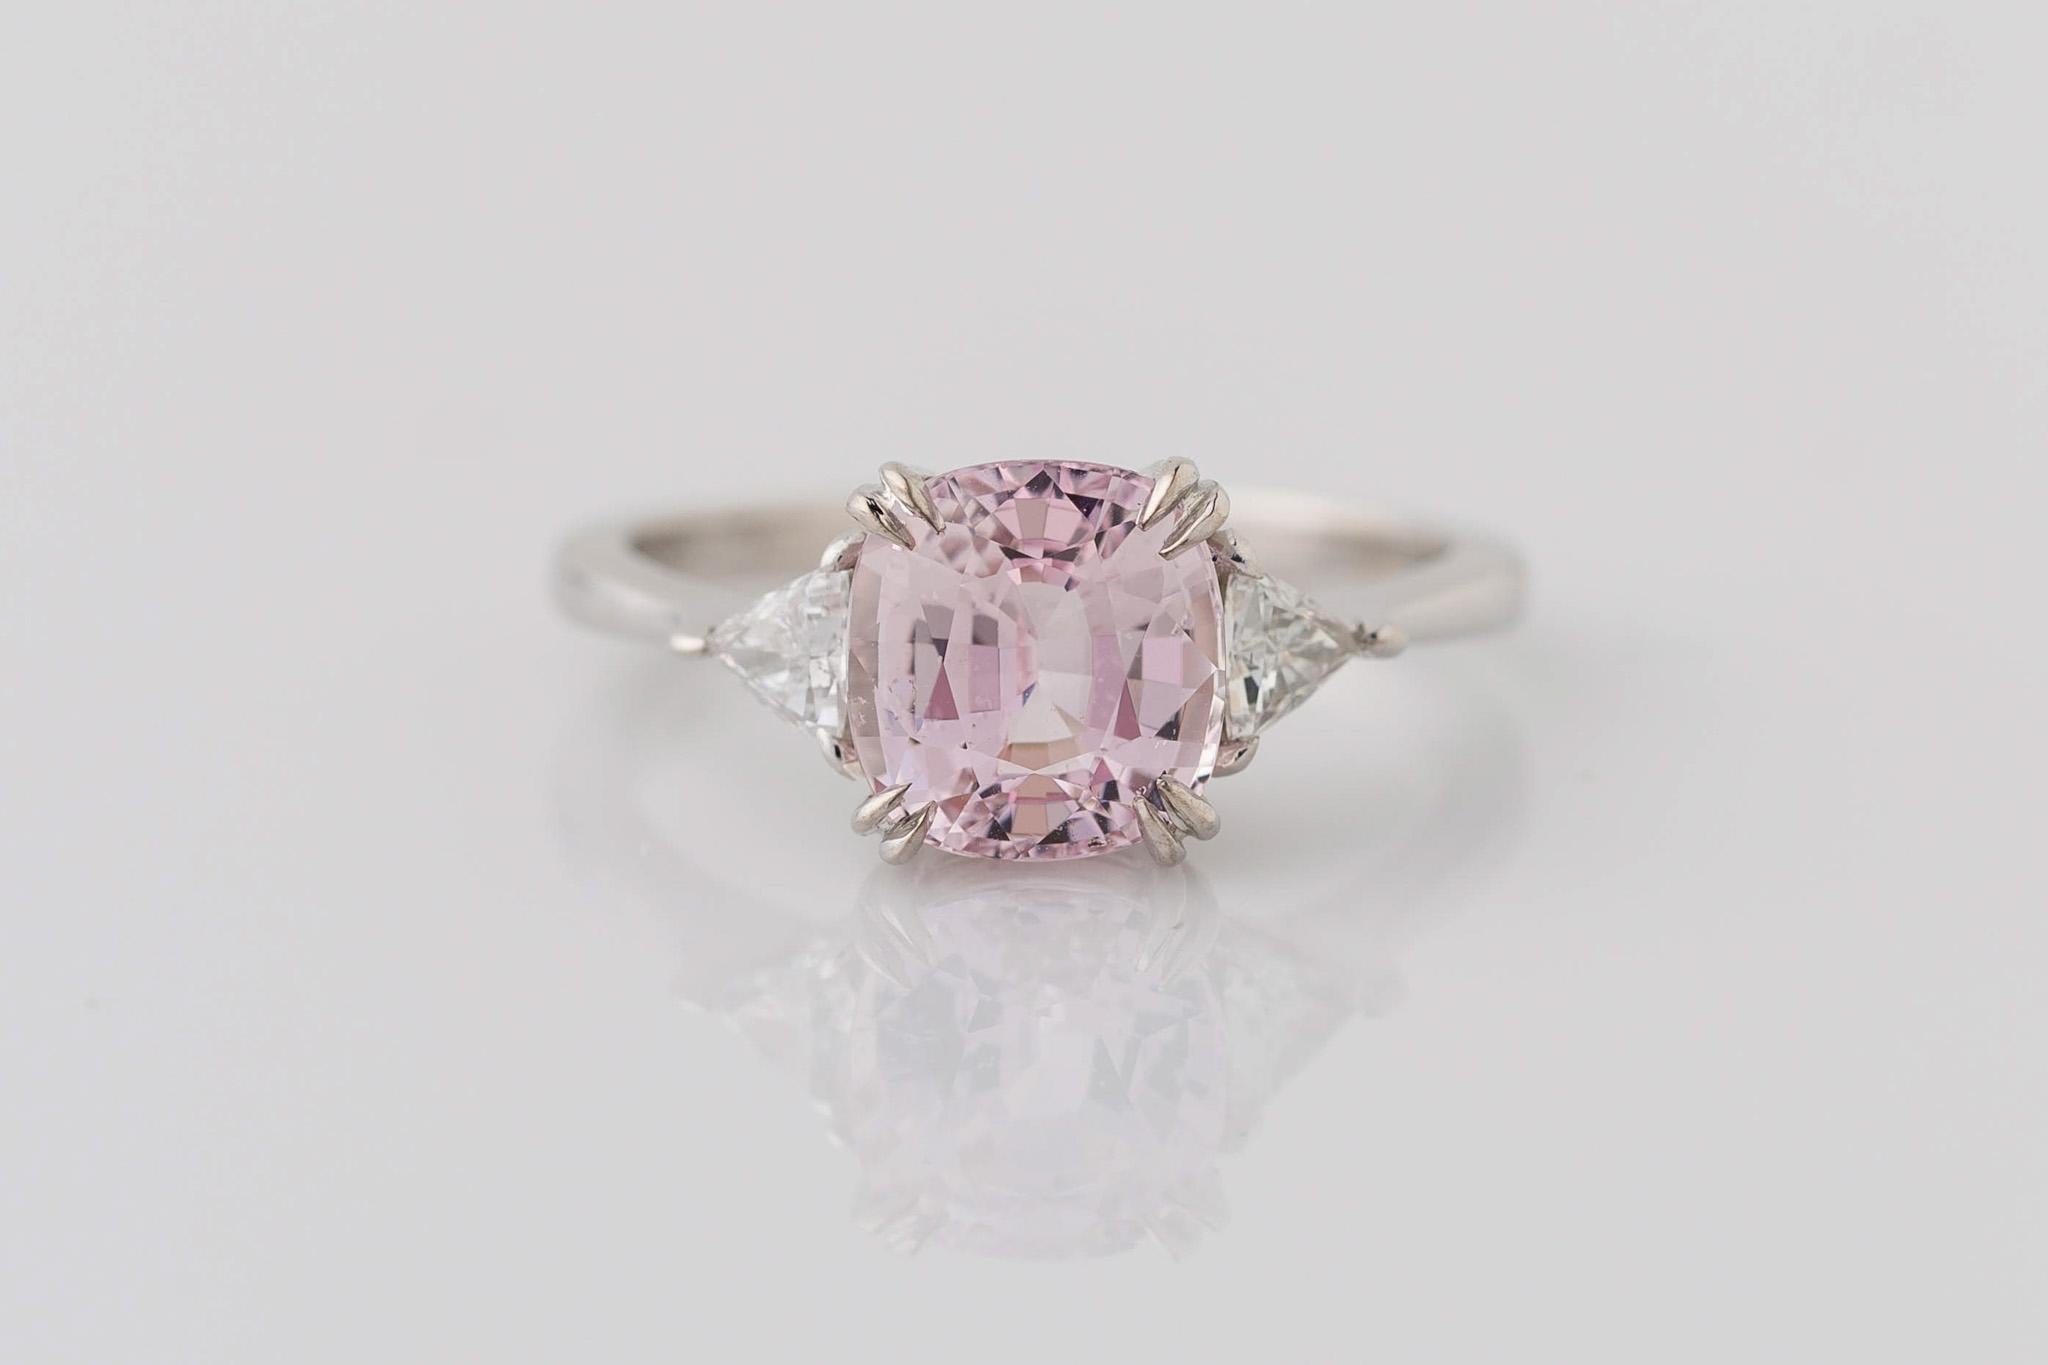 Celebrate your love with our stunning 14K White Gold 3-Stone GIA Certified Cushion Cut Pink Sapphire Ring, complete with Trillion Cut Diamonds. The centerpiece features a mesmerizing 2.59 carat GIA certified unheated pink sapphire, measuring